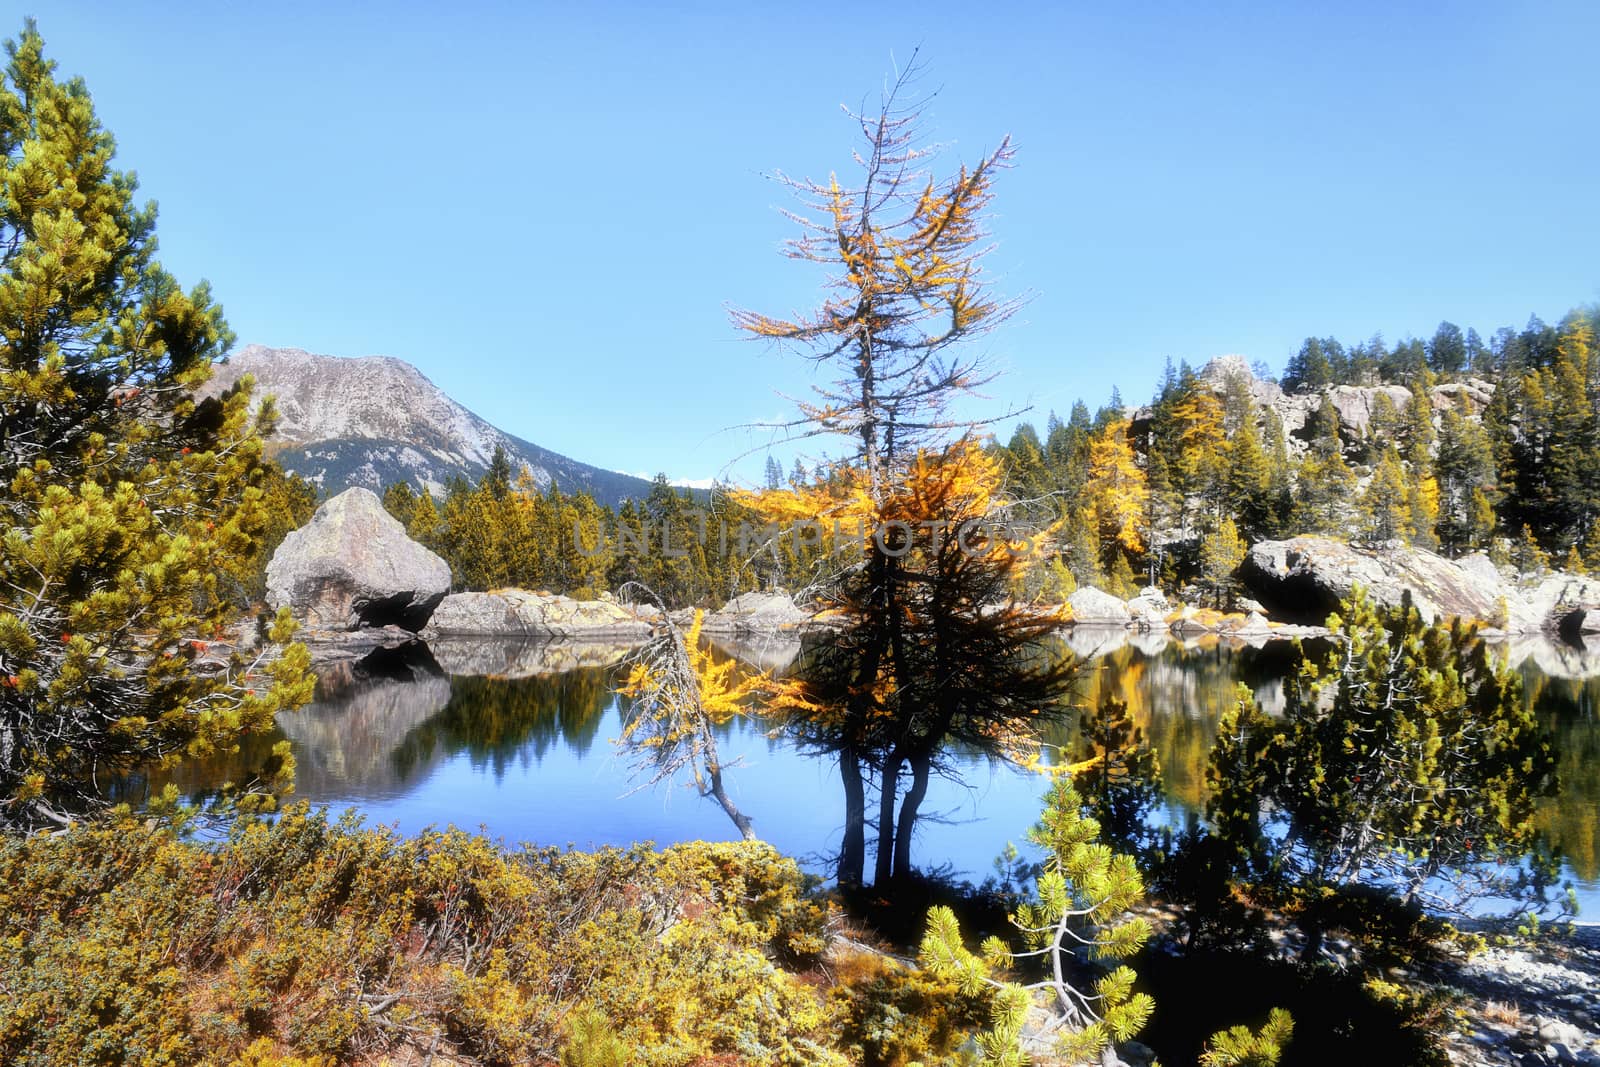 The Serva lake, a splendid alpine lake, in the natural park of Monte Avic in the Aosta valley